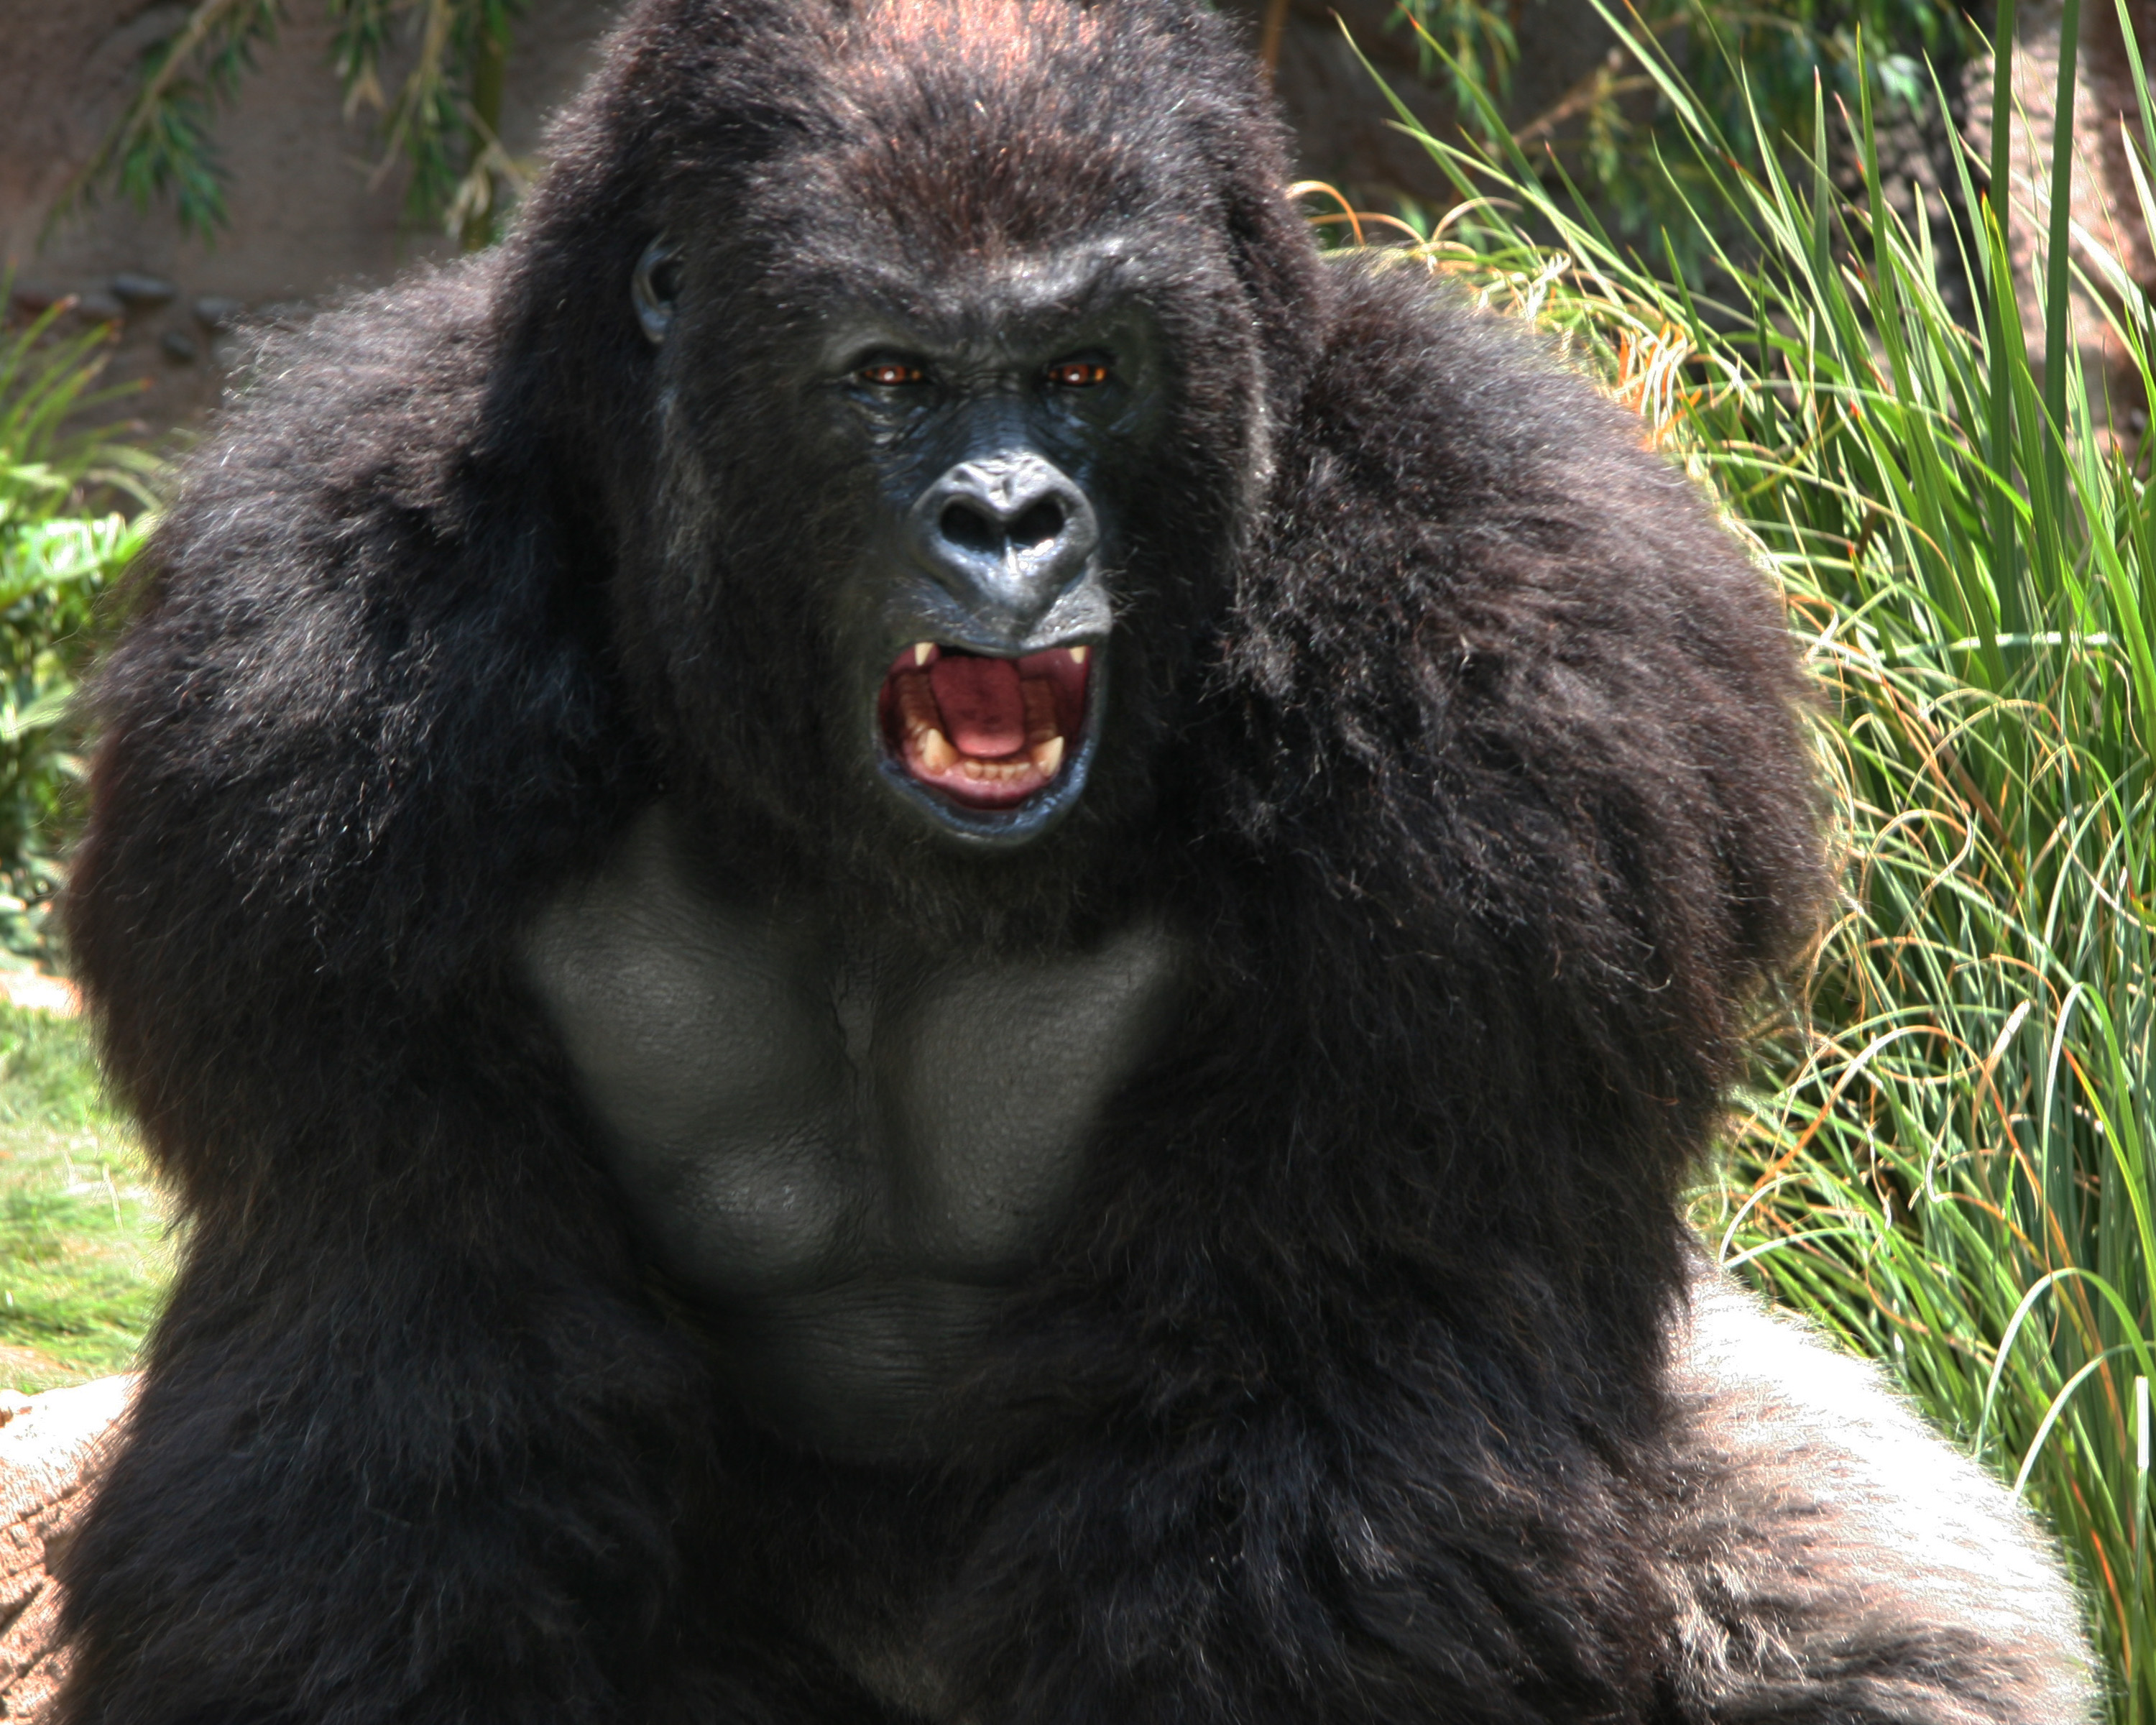 As the Gorilla in Old Dogs